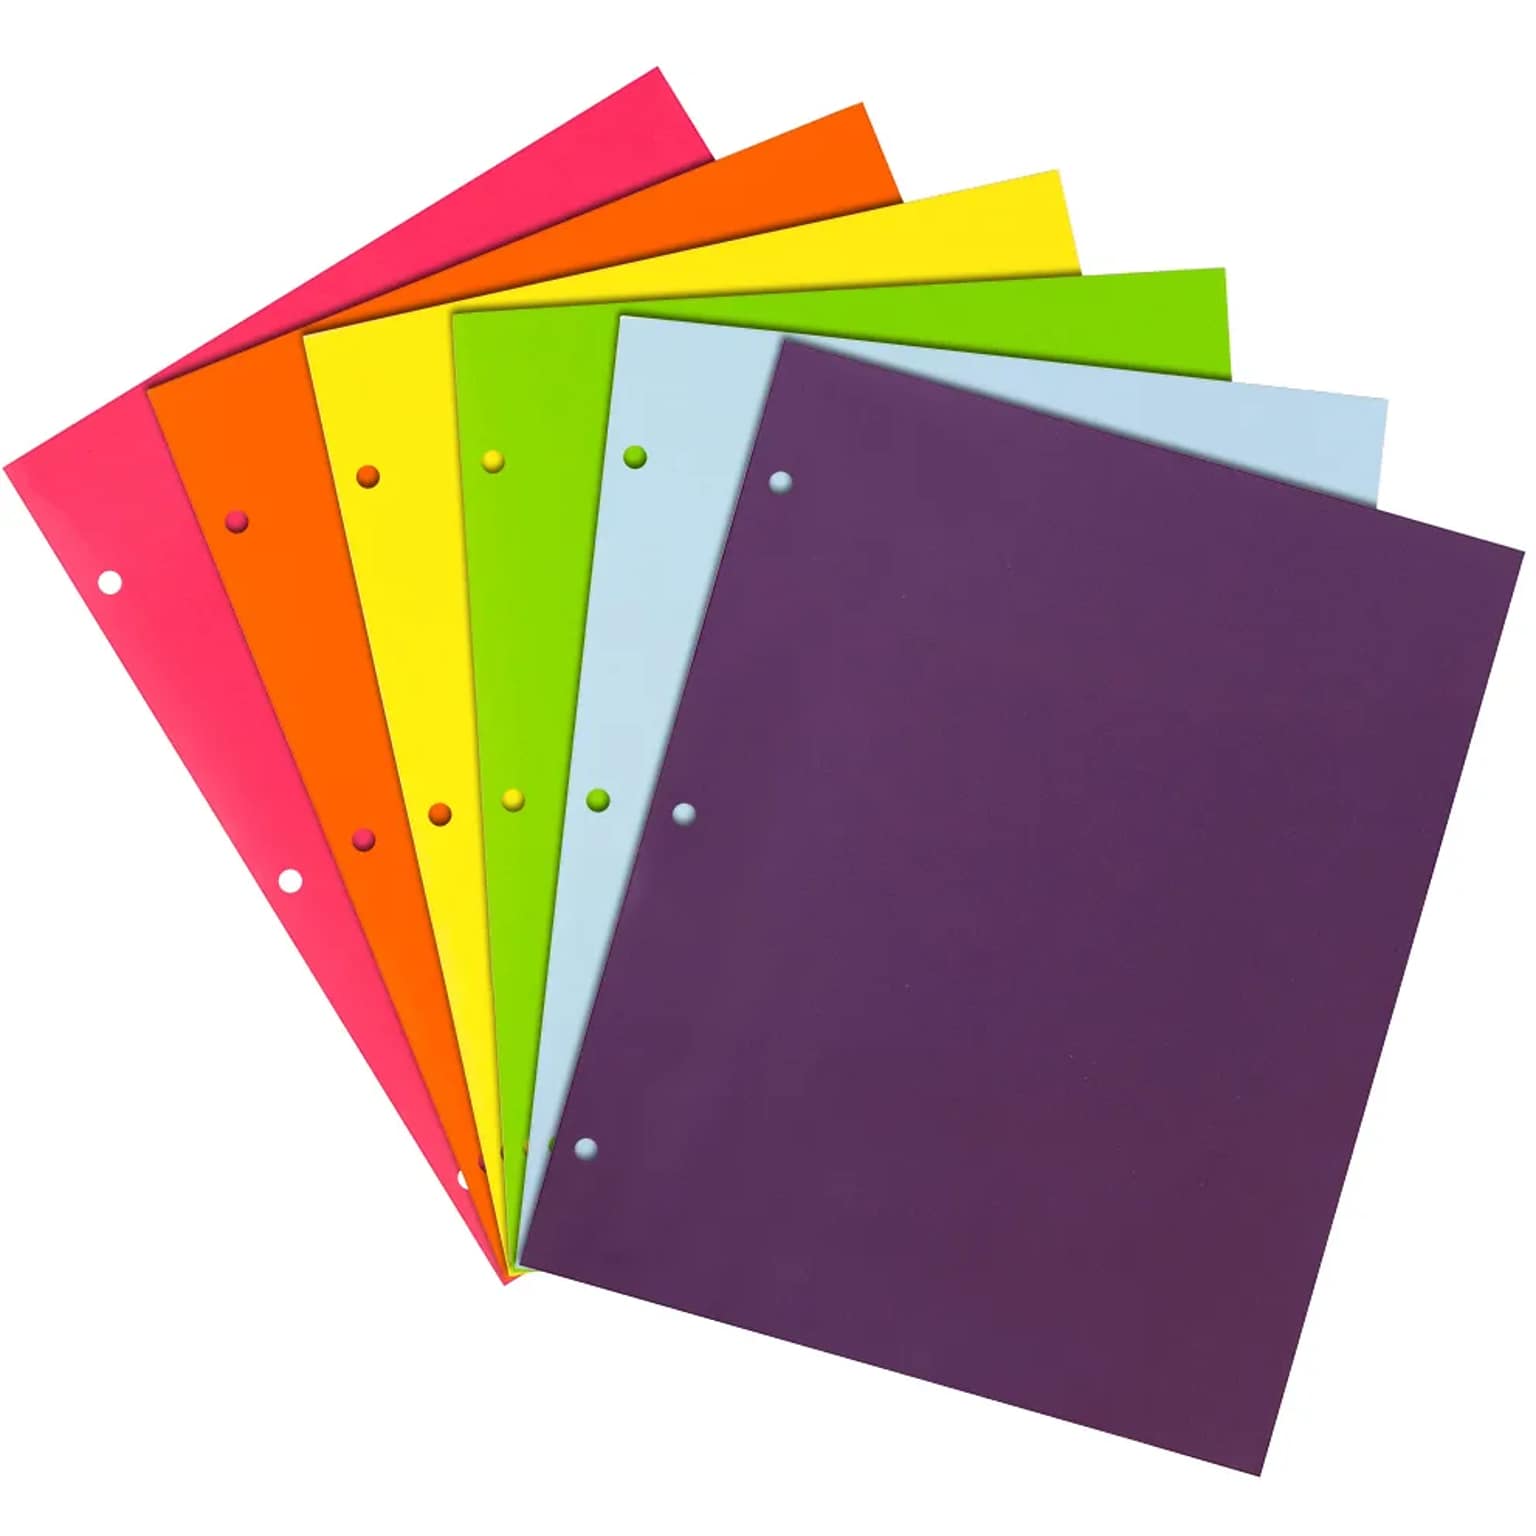 JAM Paper Laminated 3 Hole Punched, 2-Pocket Glossy Folders, Multicolored, Assorted Fashion Colors, 6/Pack (385GHPFASSRT)